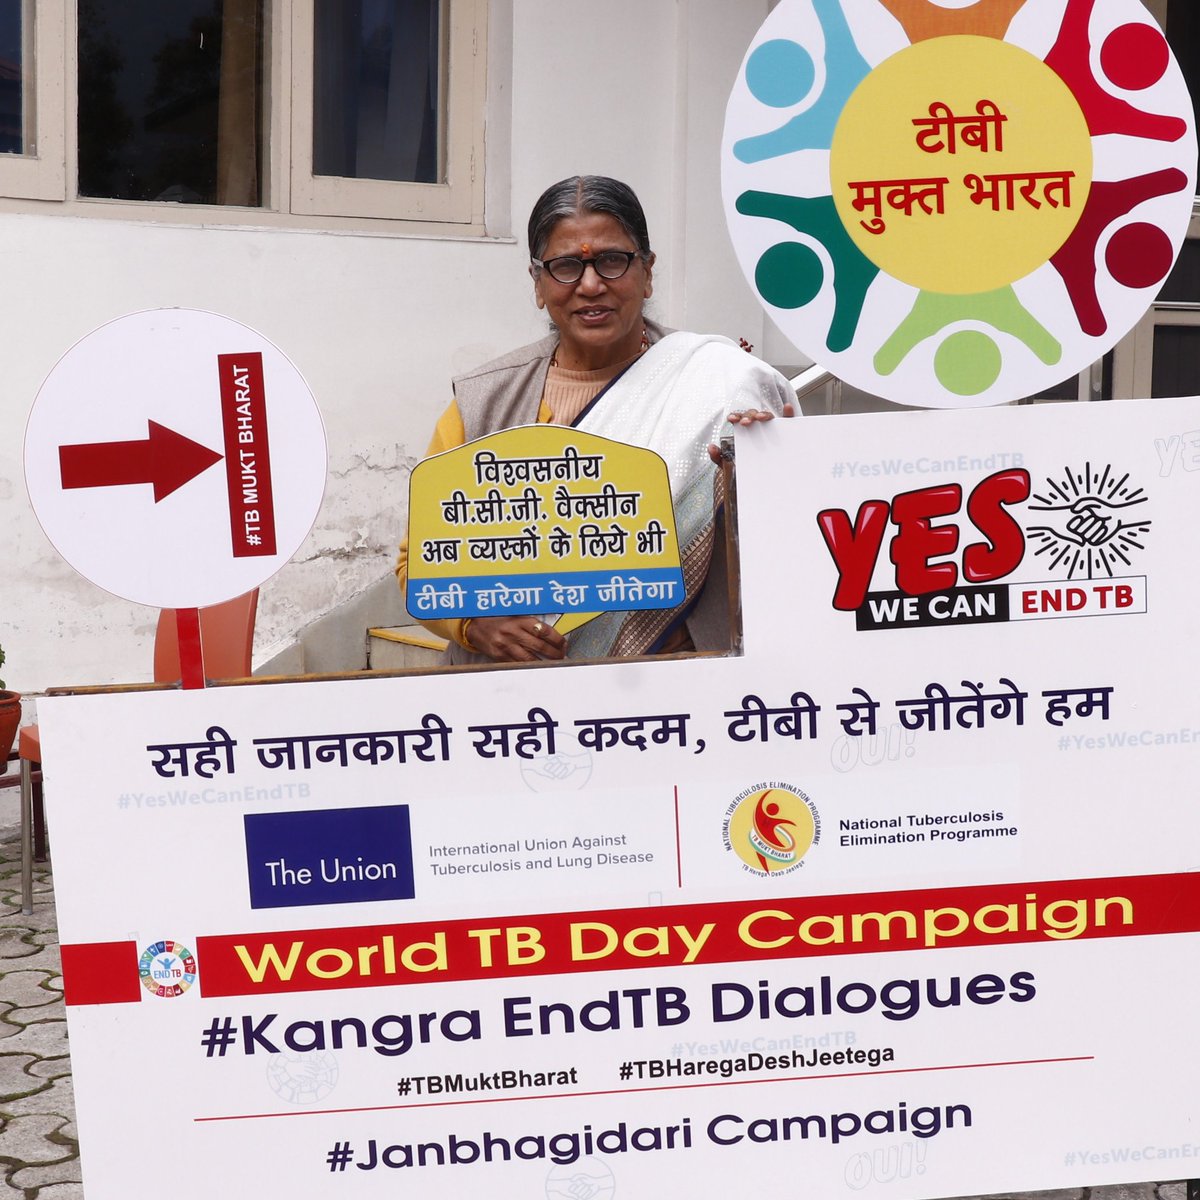 ⏭️⏭️⏭️N𝑎r𝑖 𝑆h𝑎k𝑡i W𝑒e𝑘- International Women Day Campaign 
⏭️⏭️#YesWeCanEndTB if we take all along
⏭️Kangra #EndTB Dialogues

🧿Together we stand in solidarity for #TBMuktBharat
@tbdivision @DrRaghuramRao @paimadhu @TBHDJ @TBProof @nandita_venky @phdvivek1661 @NITIAayog